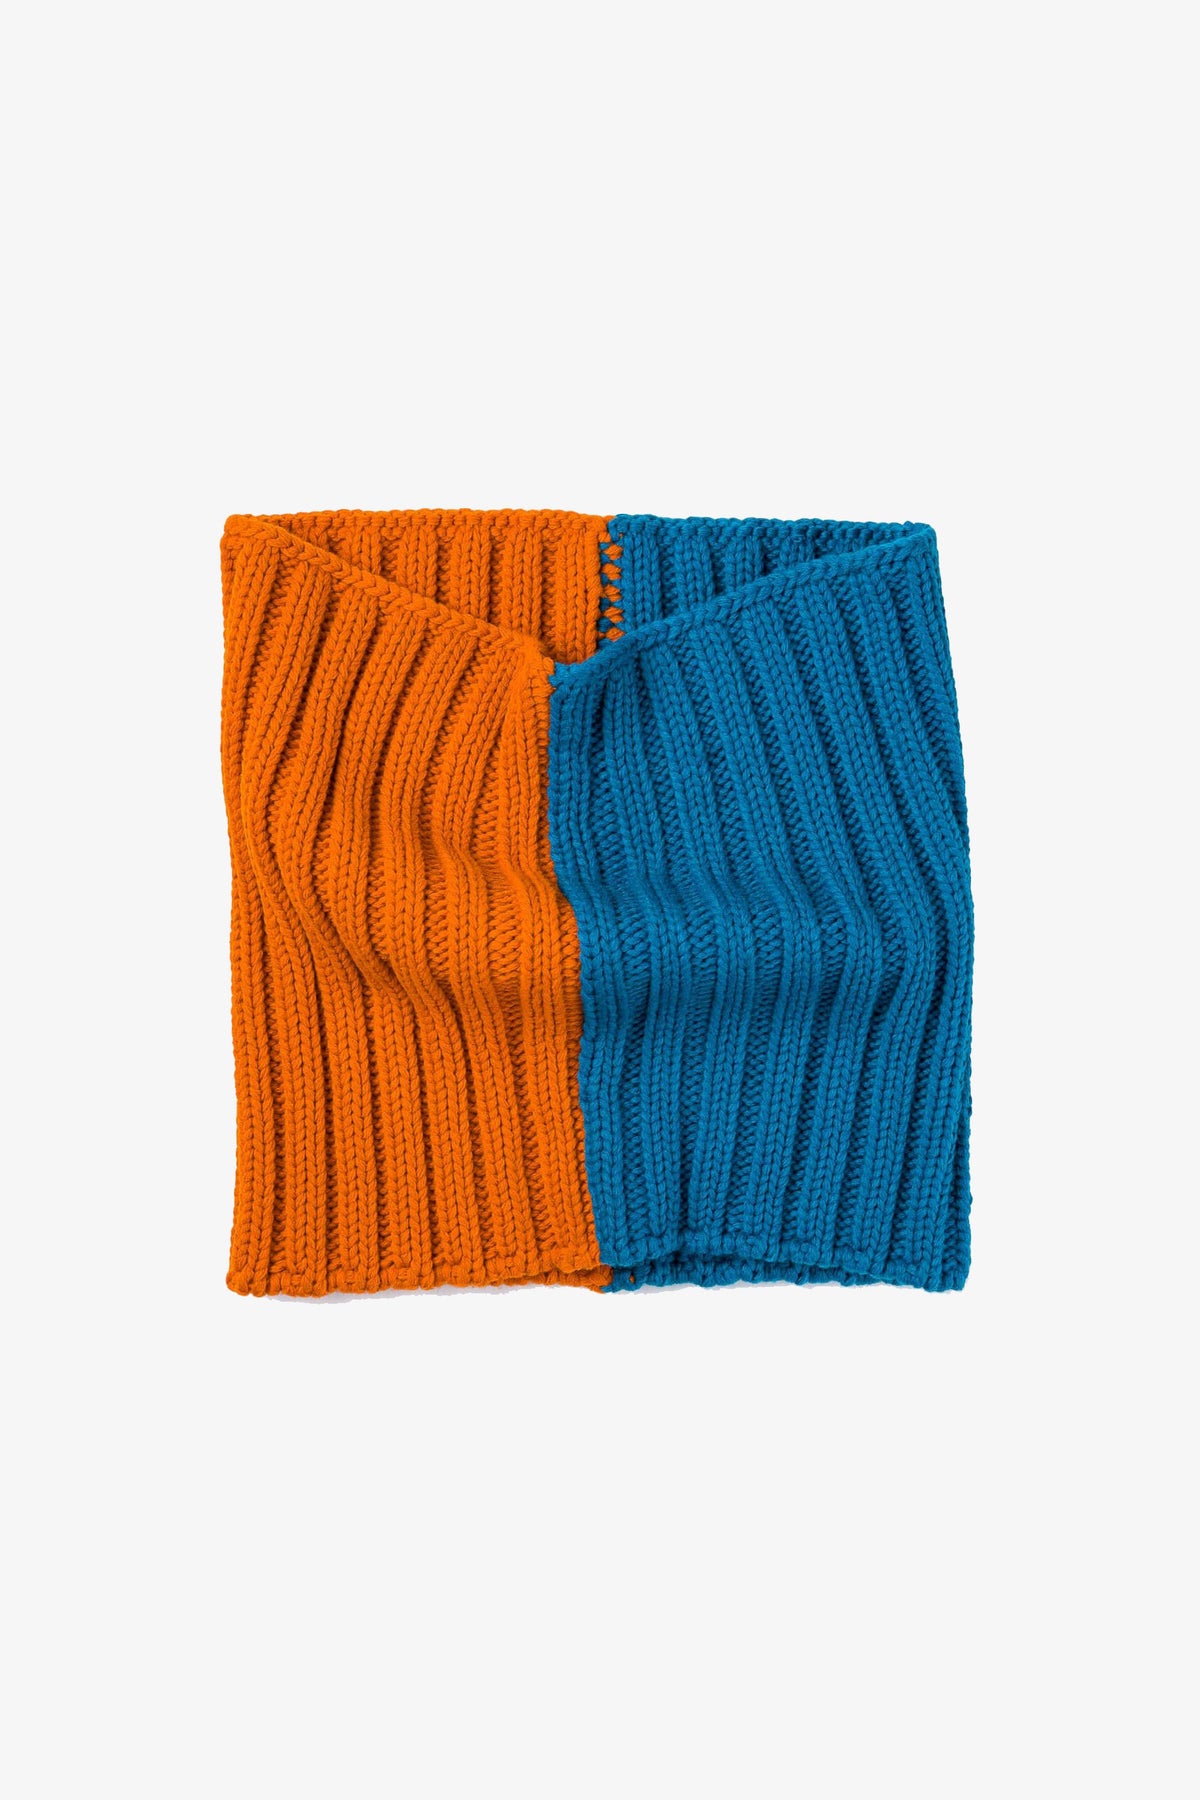 SALE Chunky Colorblock Knit Snood | Teal